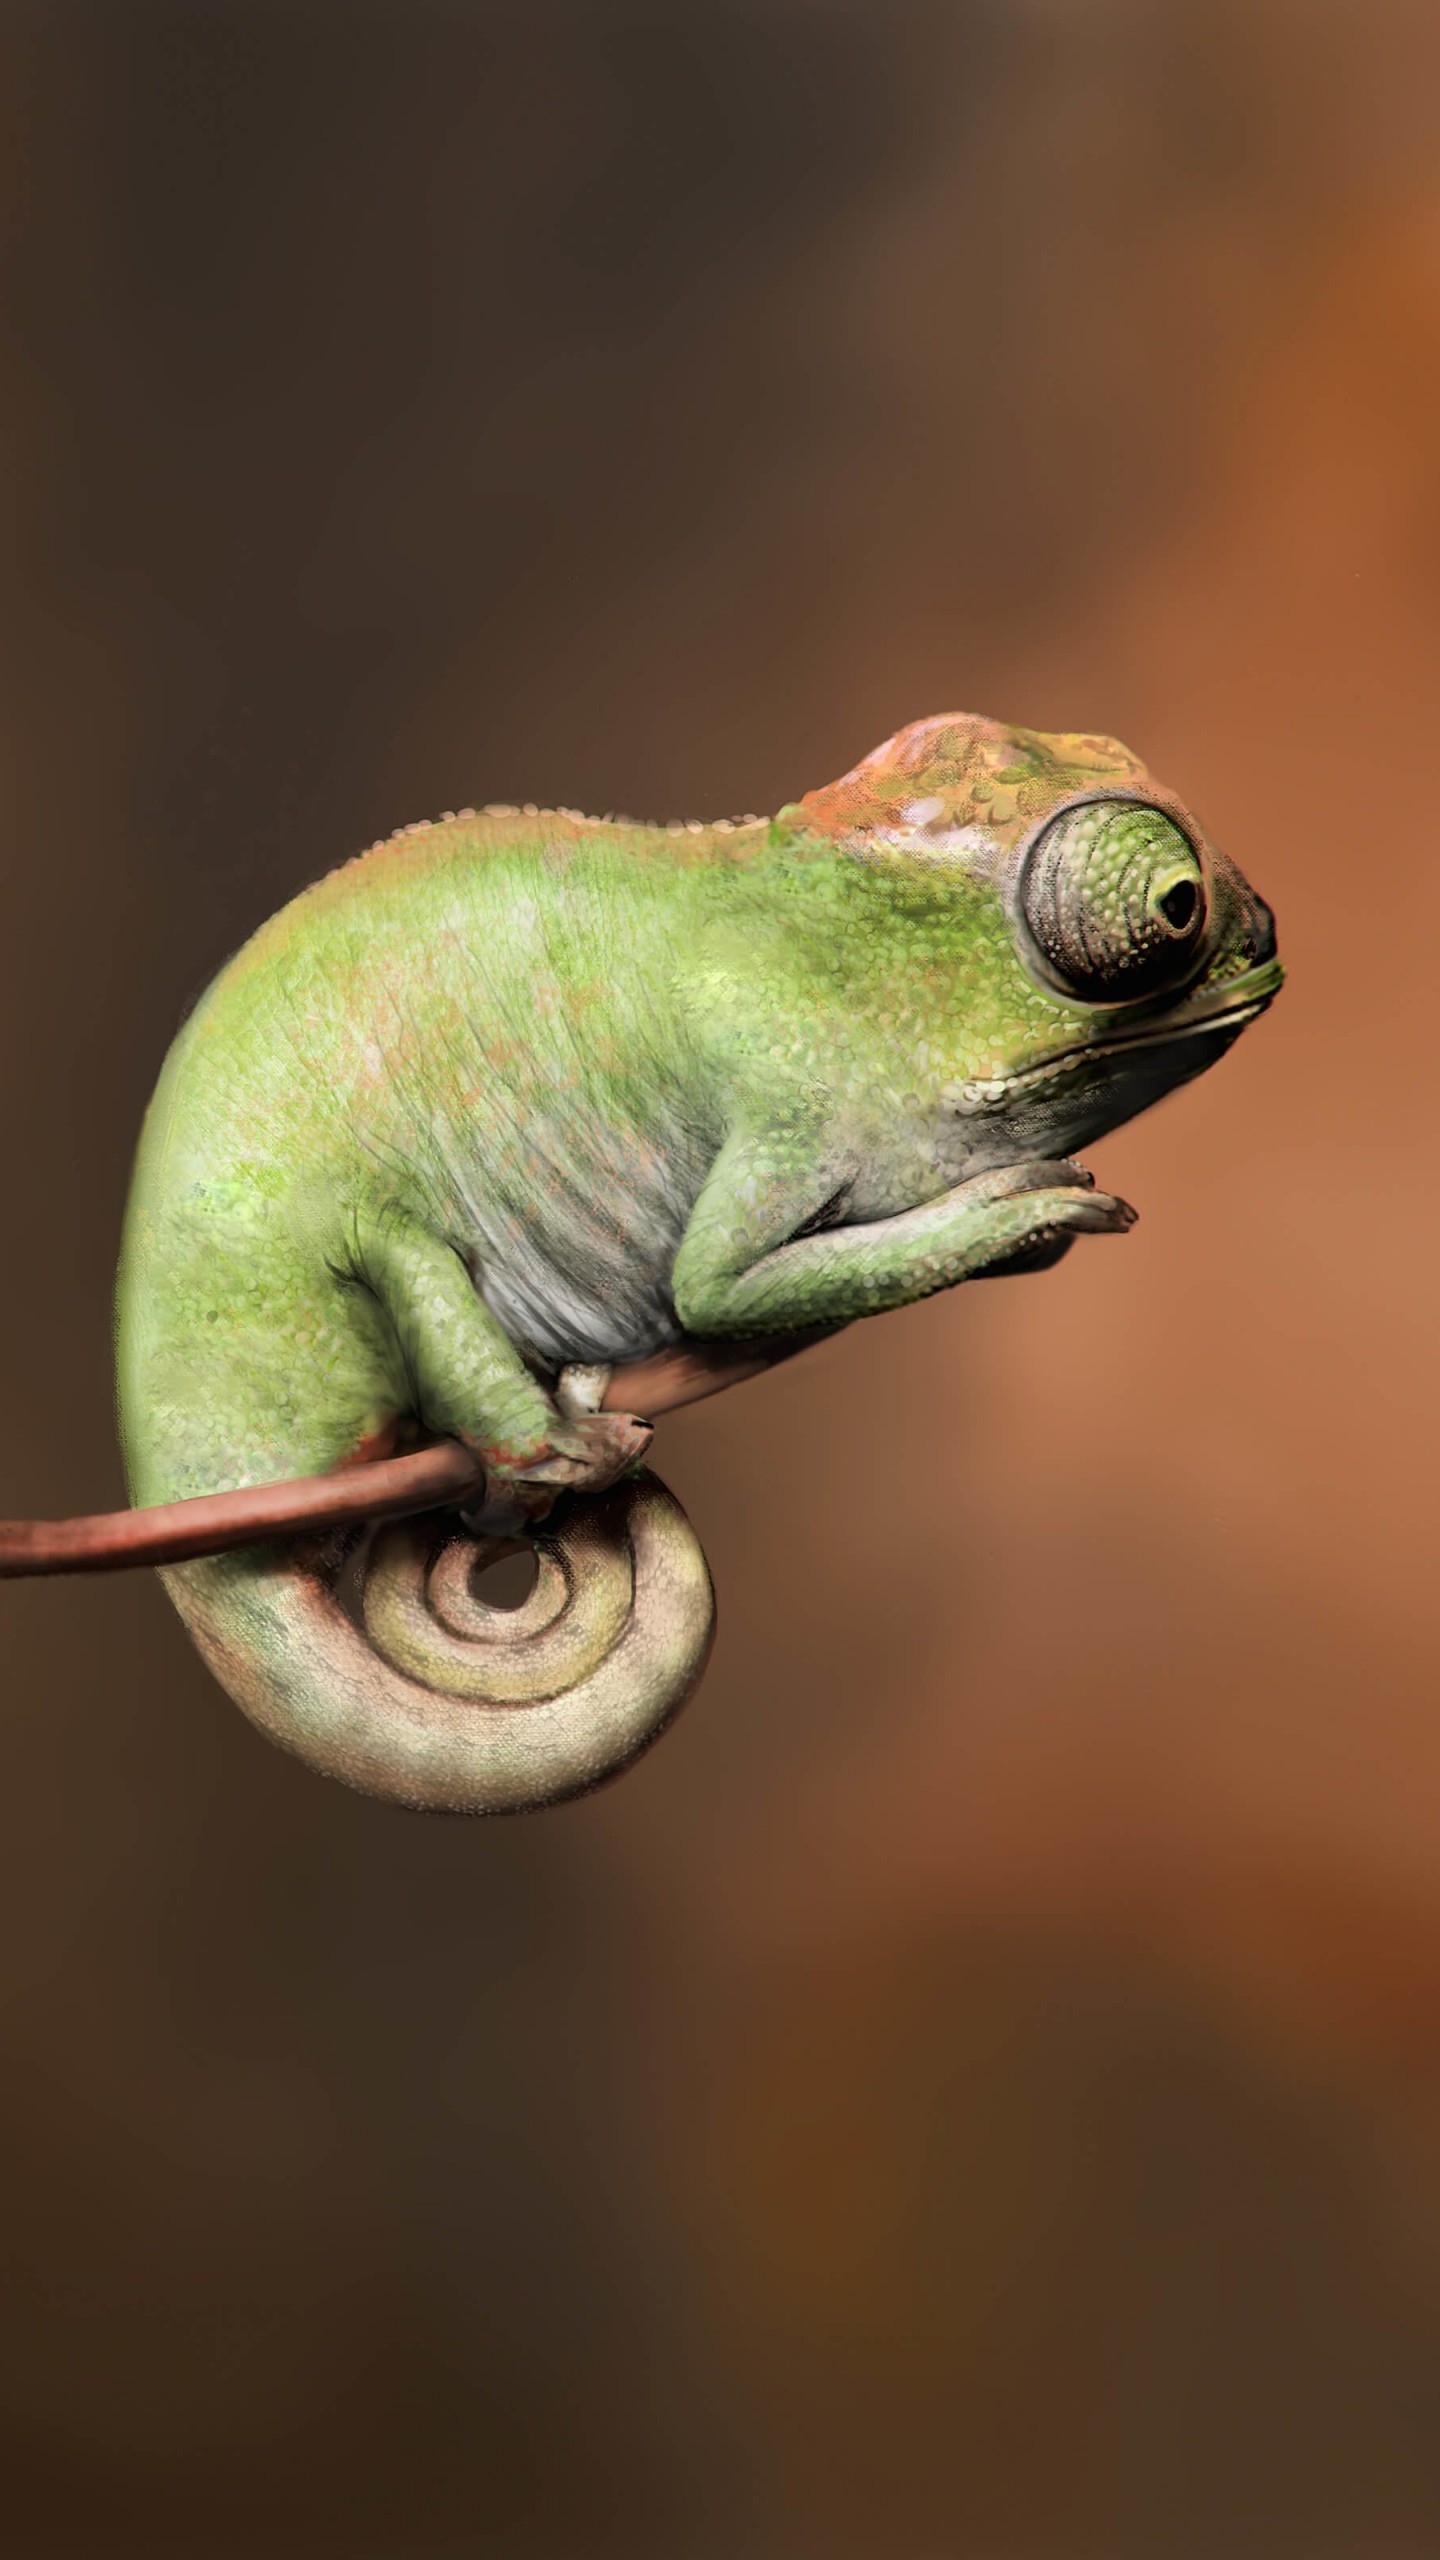 Baby Chameleon Perching On a Twisted Branch Wallpaper for Google Nexus 6